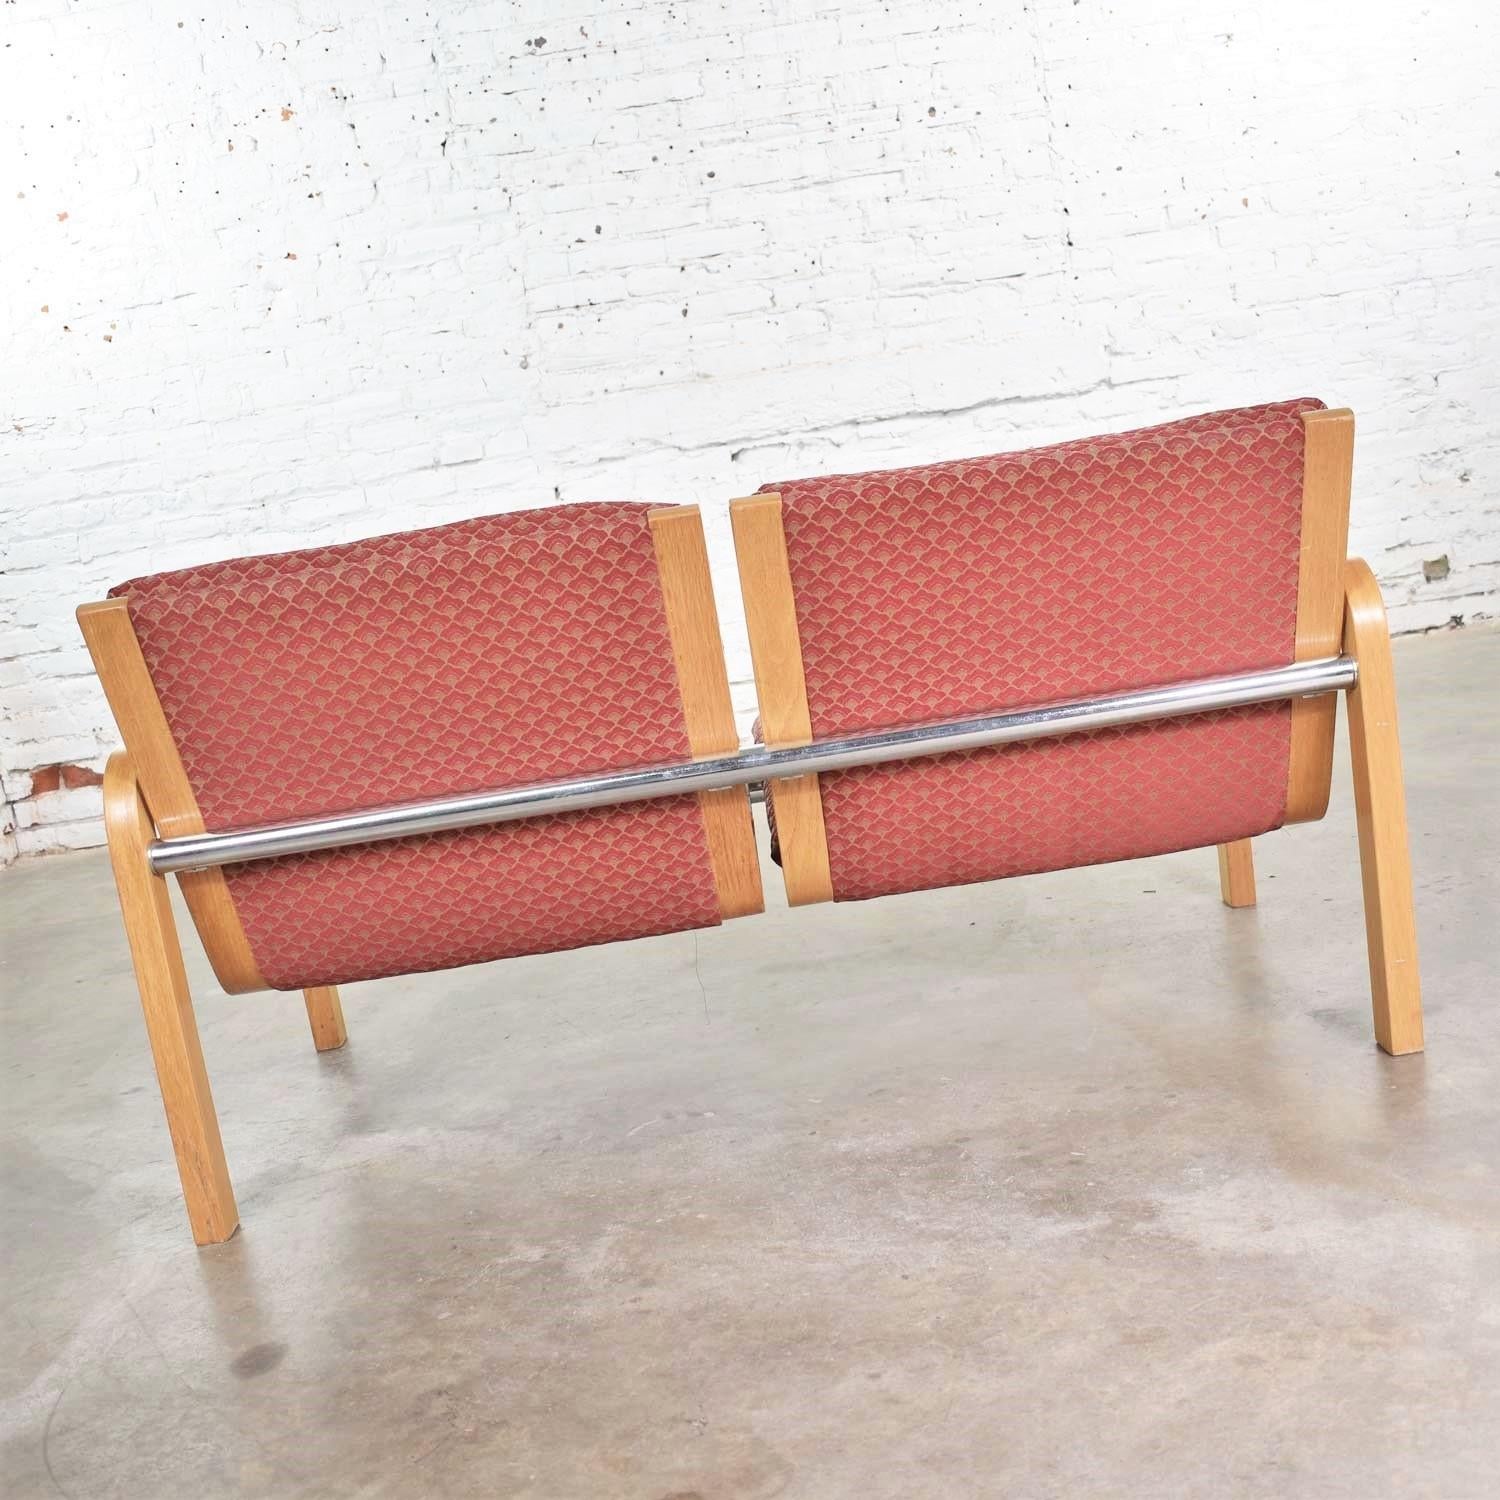 Vintage Modern Oak Bentwood & Chrome Two-Seat Settee or Bench Attr to Thonet  For Sale 4